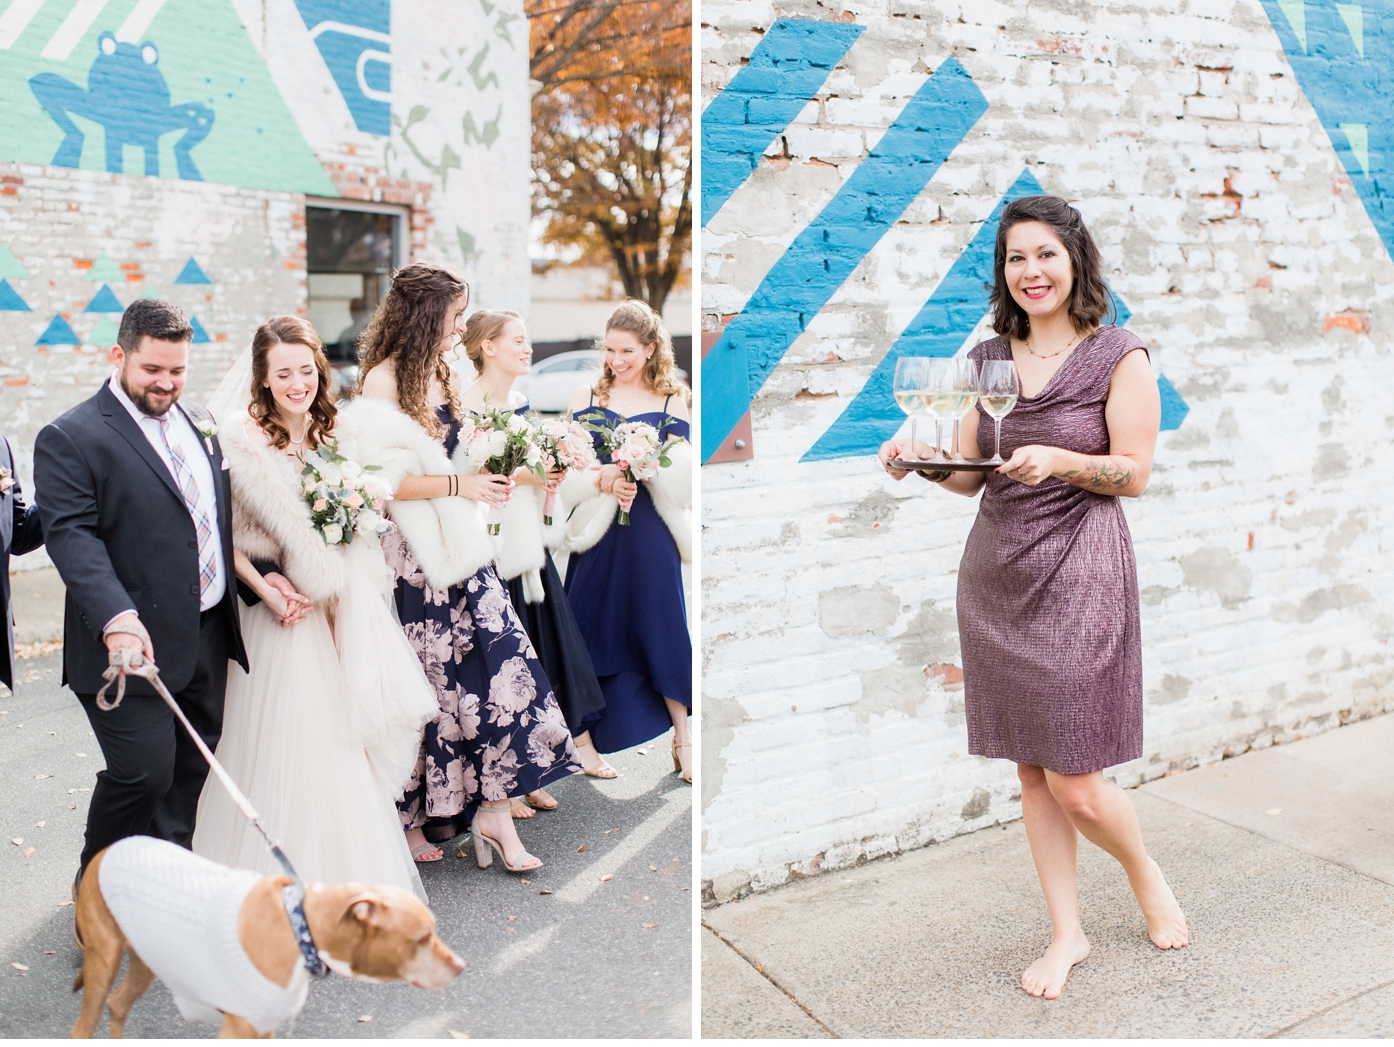 Wedding at Public Oyster in Charlottesville VA by Alisandra Photography